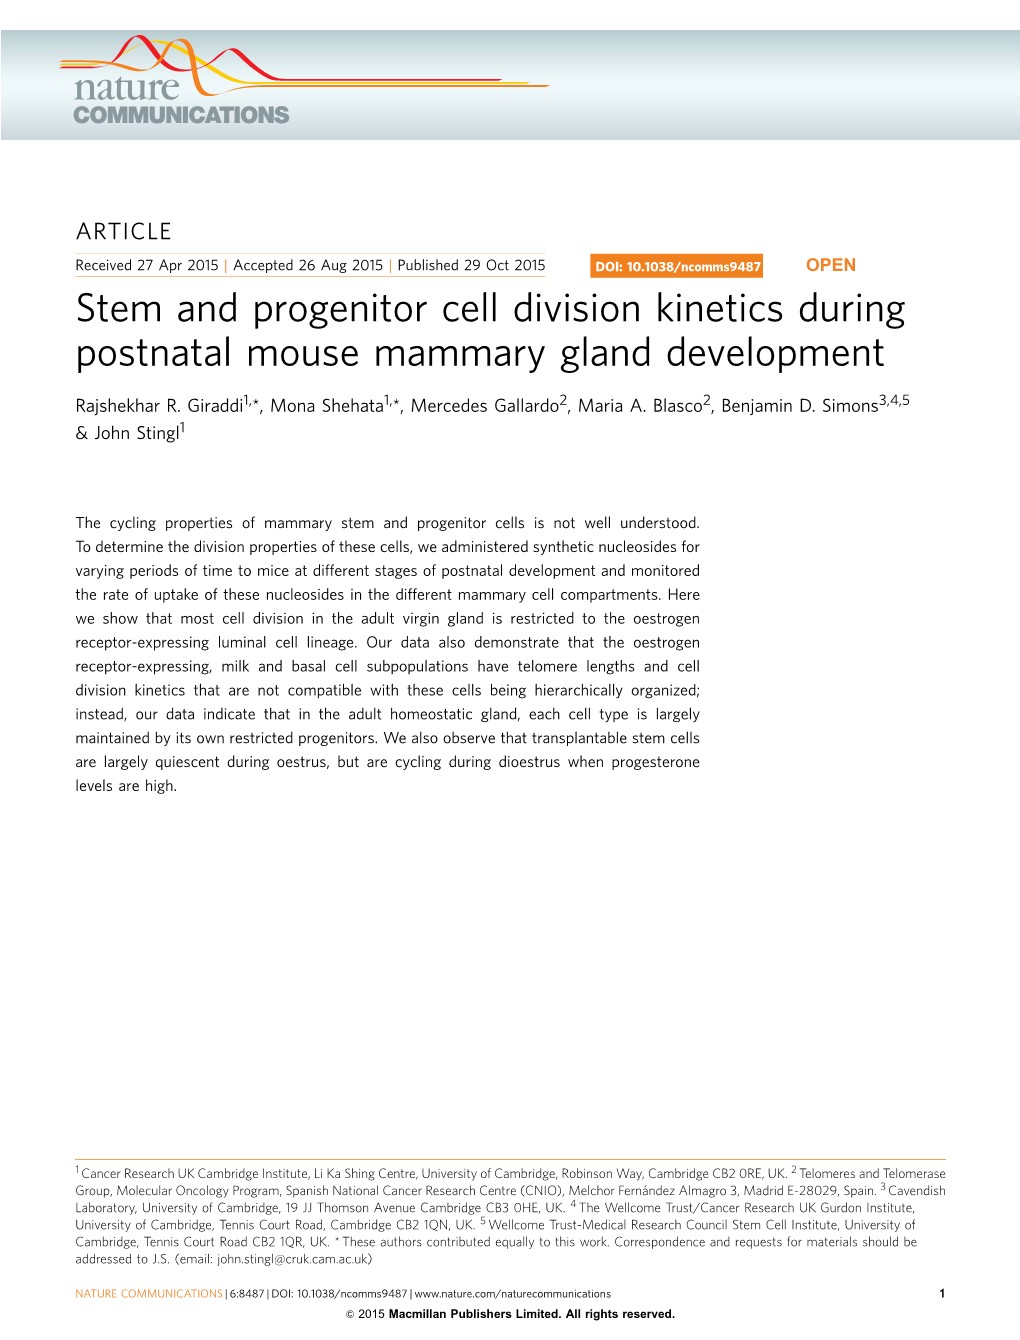 Stem and Progenitor Cell Division Kinetics During Postnatal Mouse Mammary Gland Development